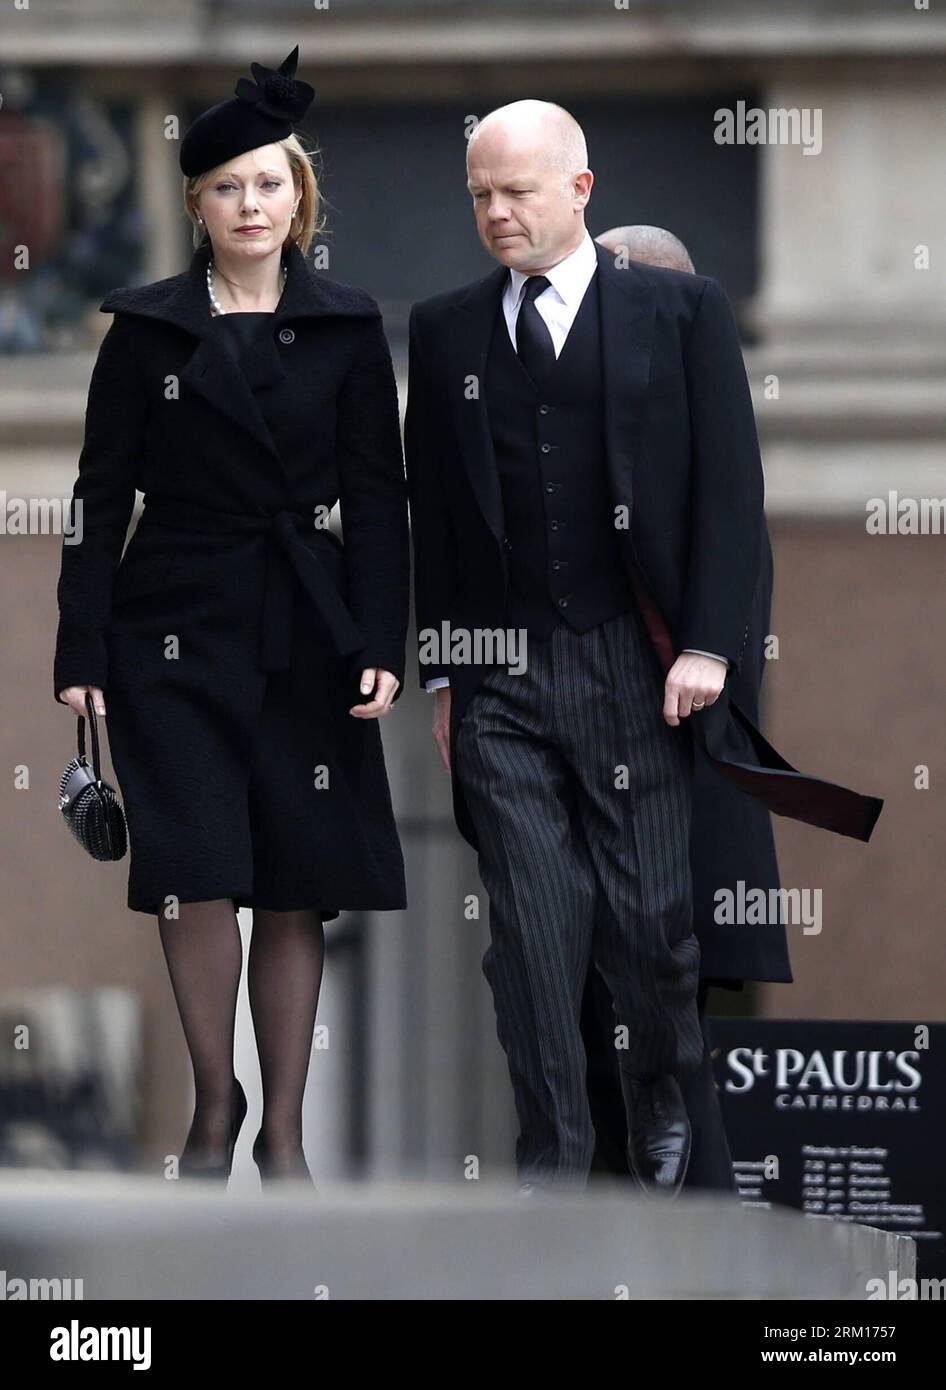 130417 -- LONDON, April 17, 2013 Xinhua -- British Foreign Secretary William Hague R and his wife Ffion Jenkins arrive for the funeral of former British Prime Minister Margaret Thatcher, outside St. Paul s Cathedral in London, Britain on April 17, 2013. The funeral of Margaret Thatcher, the first female British prime minister, started 11 a.m. local time on Wednesday in London. Xinhua/Wang Lili ybg BRITAIN-LONDON-THATCHER-FUNERAL PUBLICATIONxNOTxINxCHN Stock Photo